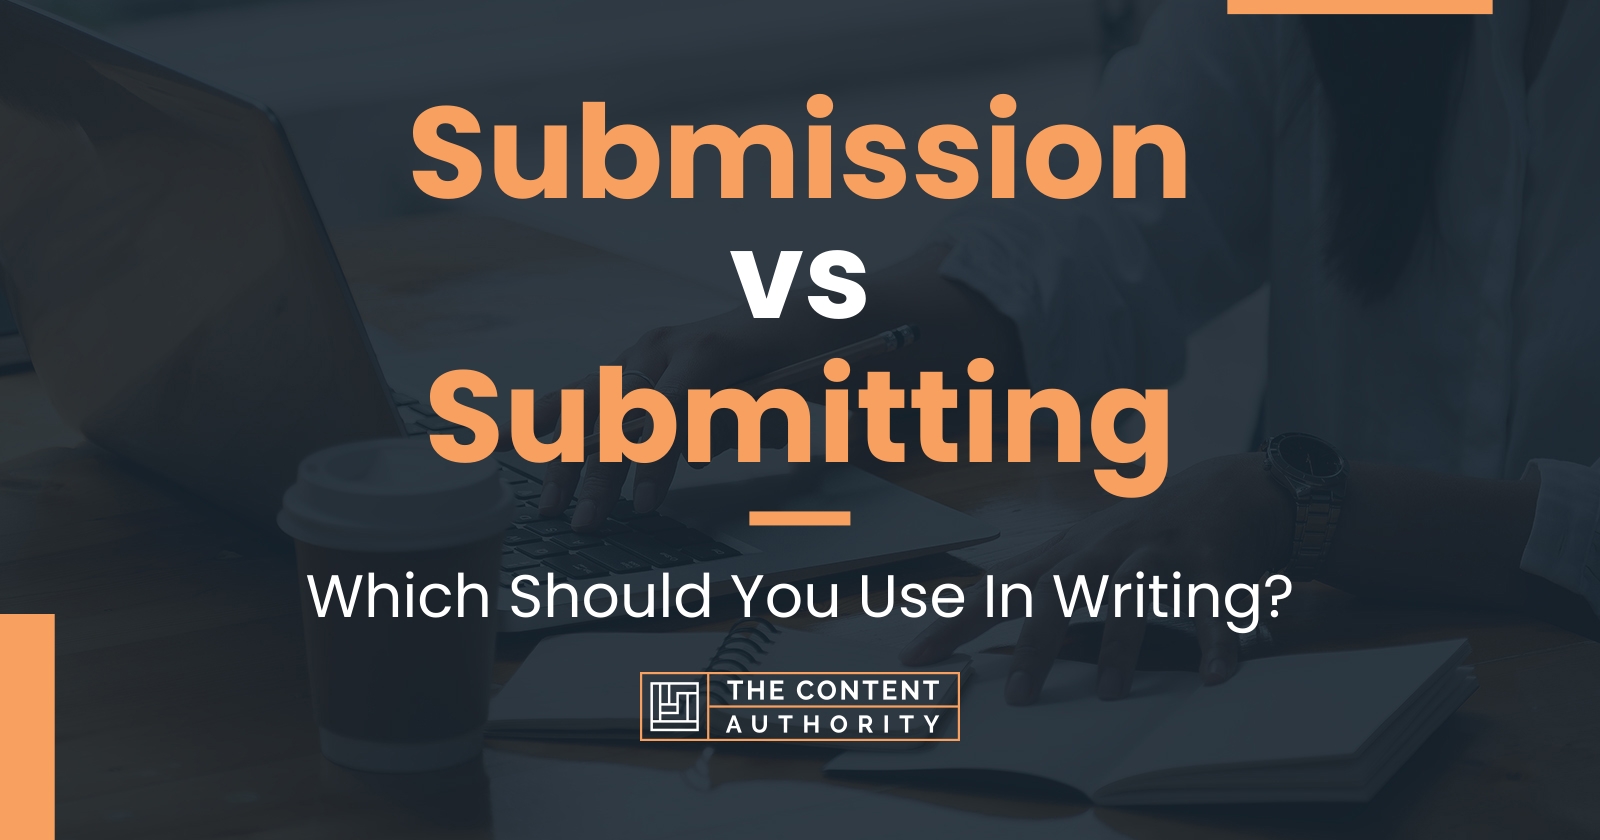 Submission vs Submitting: Which Should You Use In Writing?